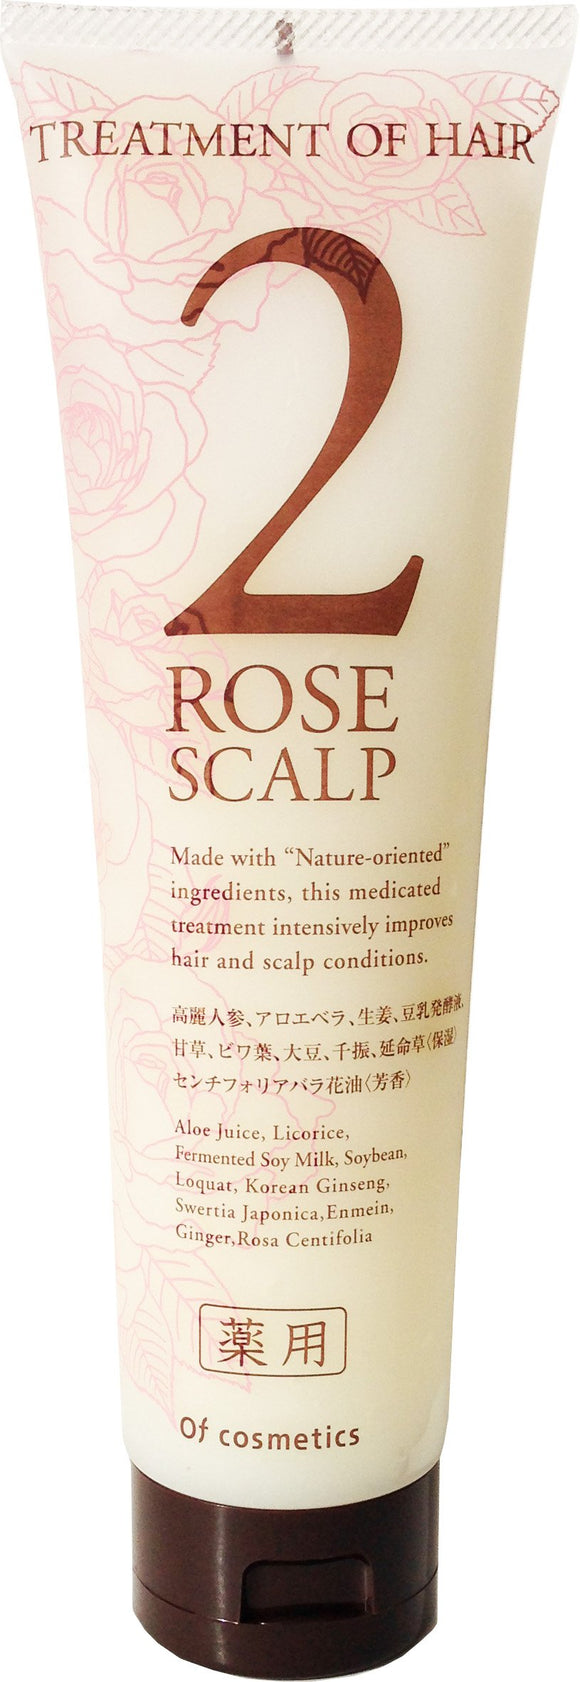 Of Cosmetics Medicated Treatment of Hair 2-RO Scalp (Those who want a healthy scalp and smooth hair) 210g Rose Bouquet Fragrance Beauty Salon Exclusive Scalp Care Treatment